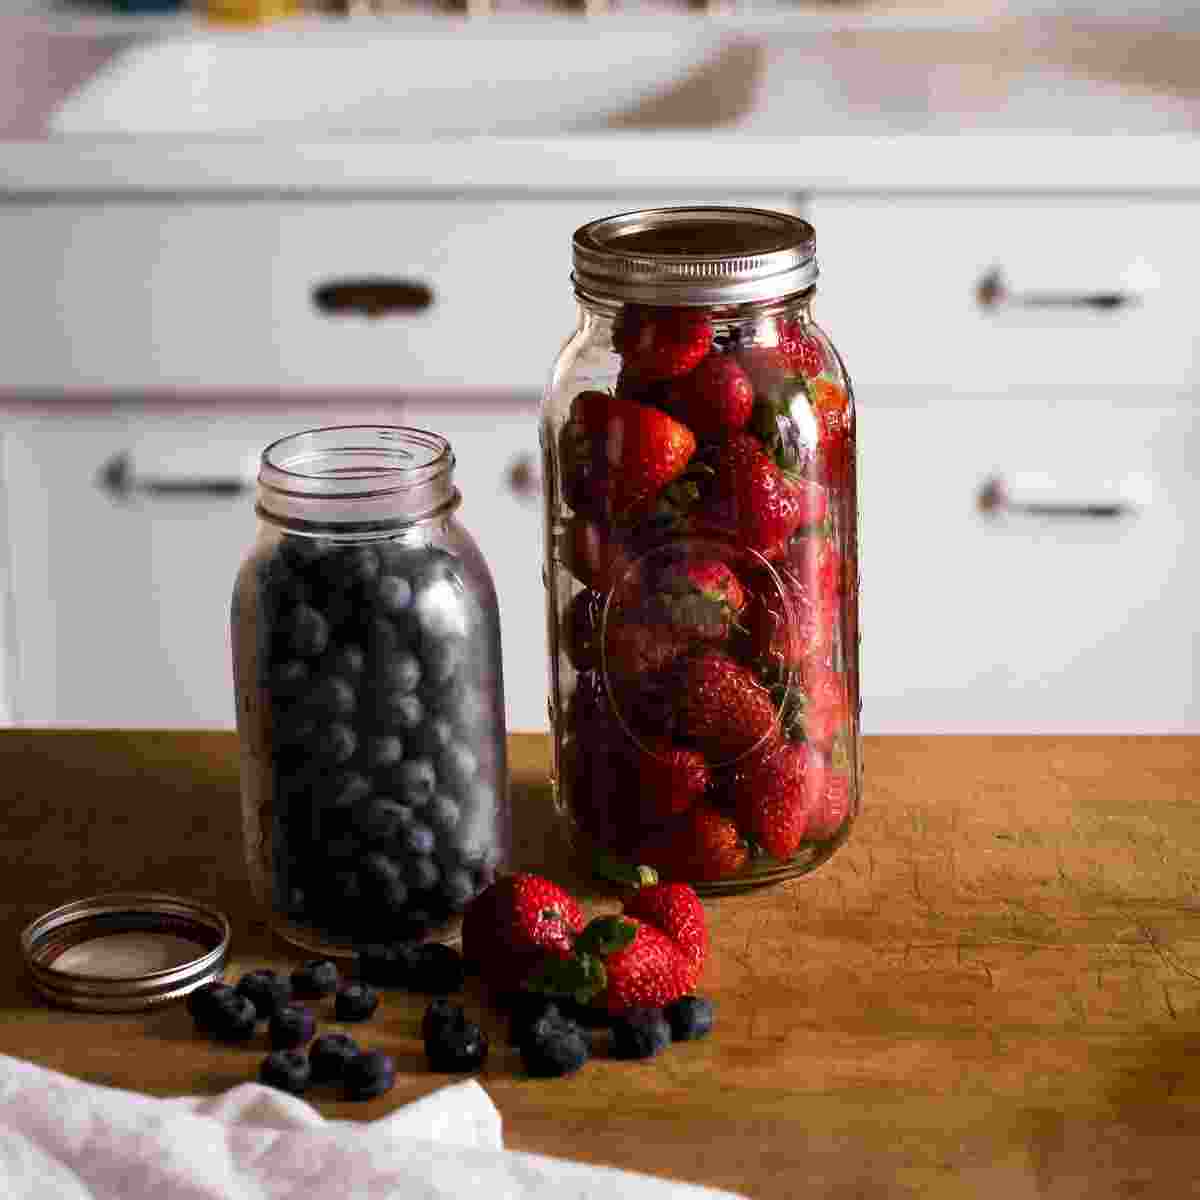 SIMPLE HACK TO KEEP YOUR BERRIES FRESH FOR WEEKS